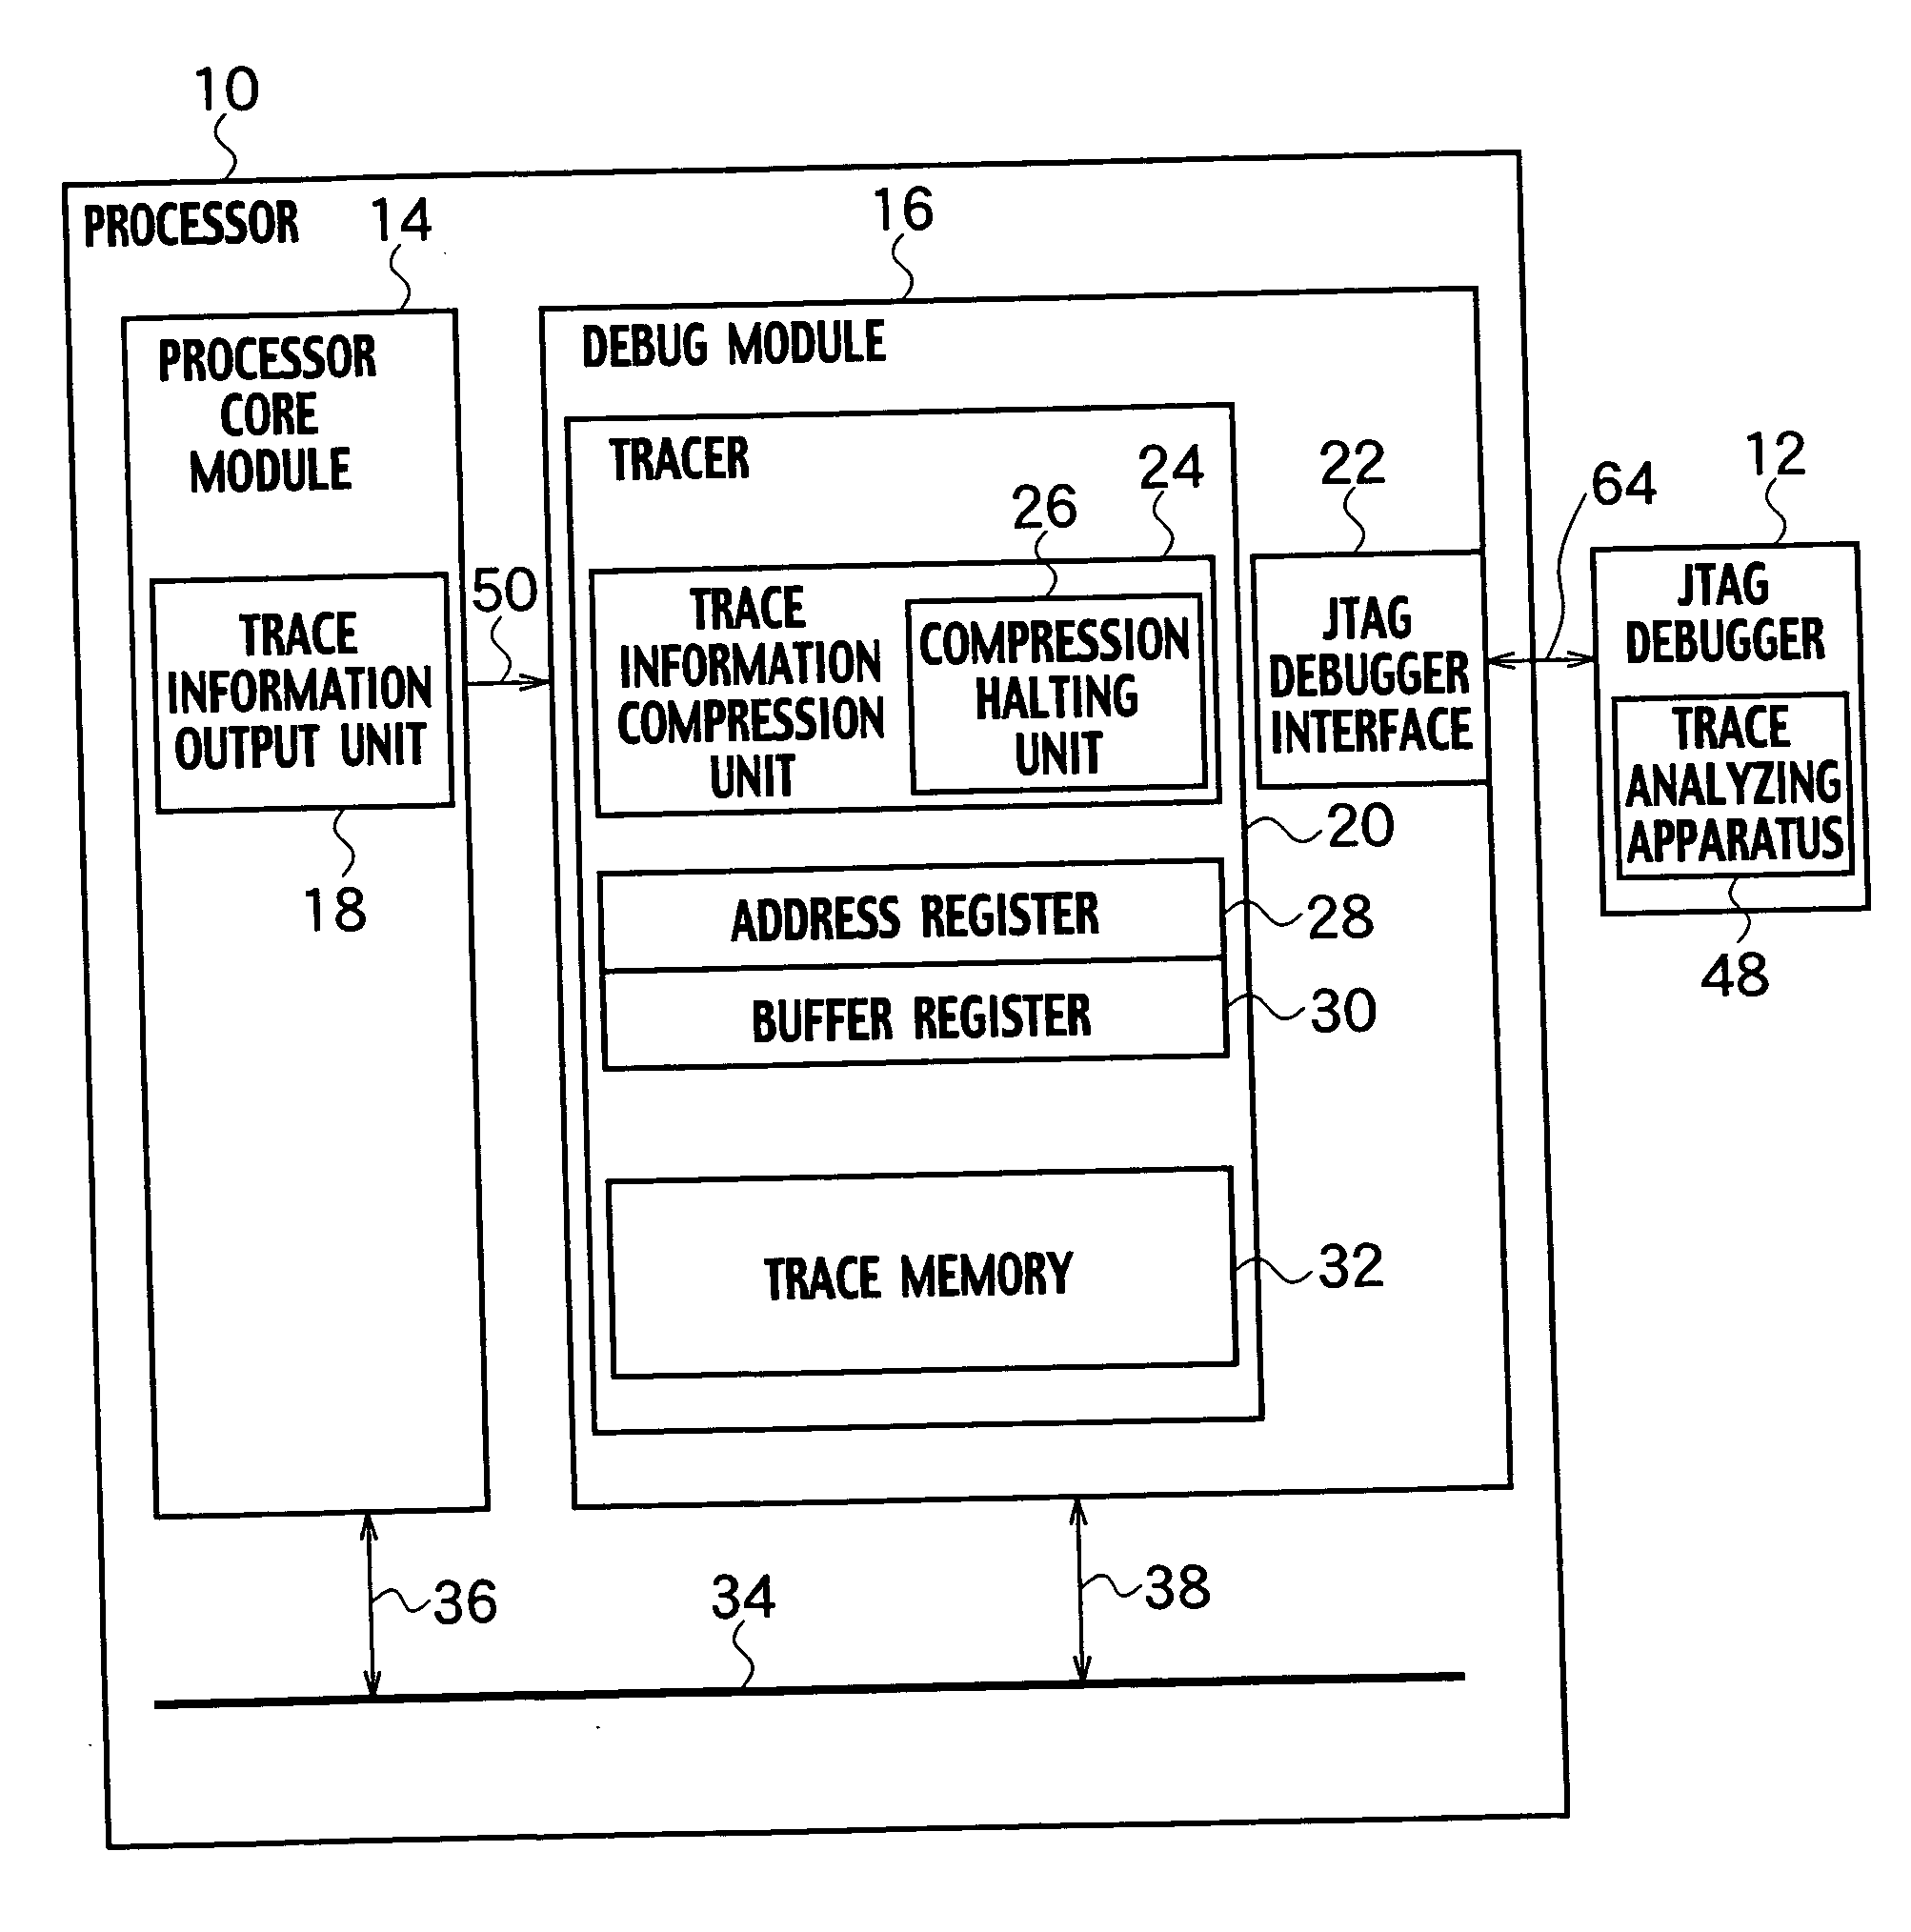 Trace analyzing apparatus, trace analyzing method, and processor